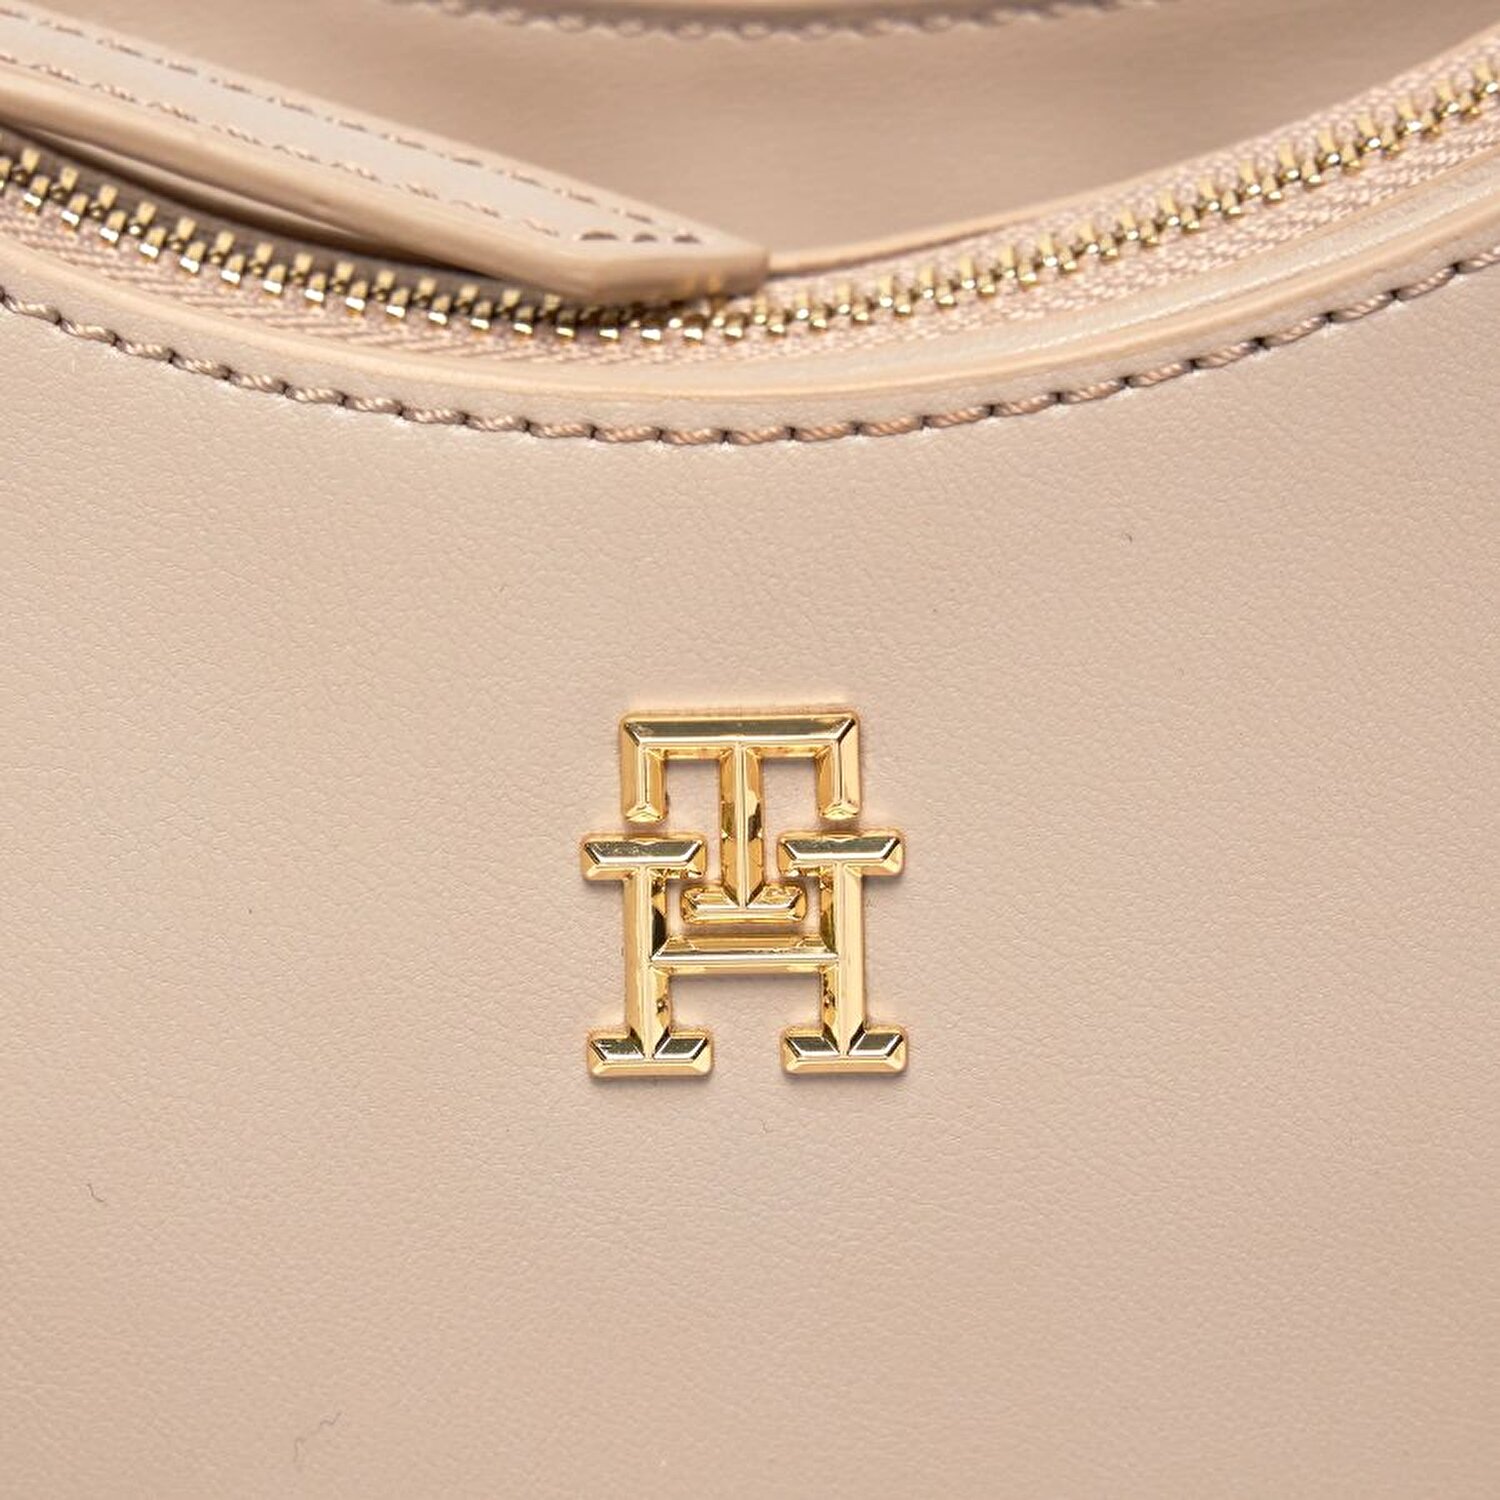 TH REFINED CHAIN SHOULDER BAG